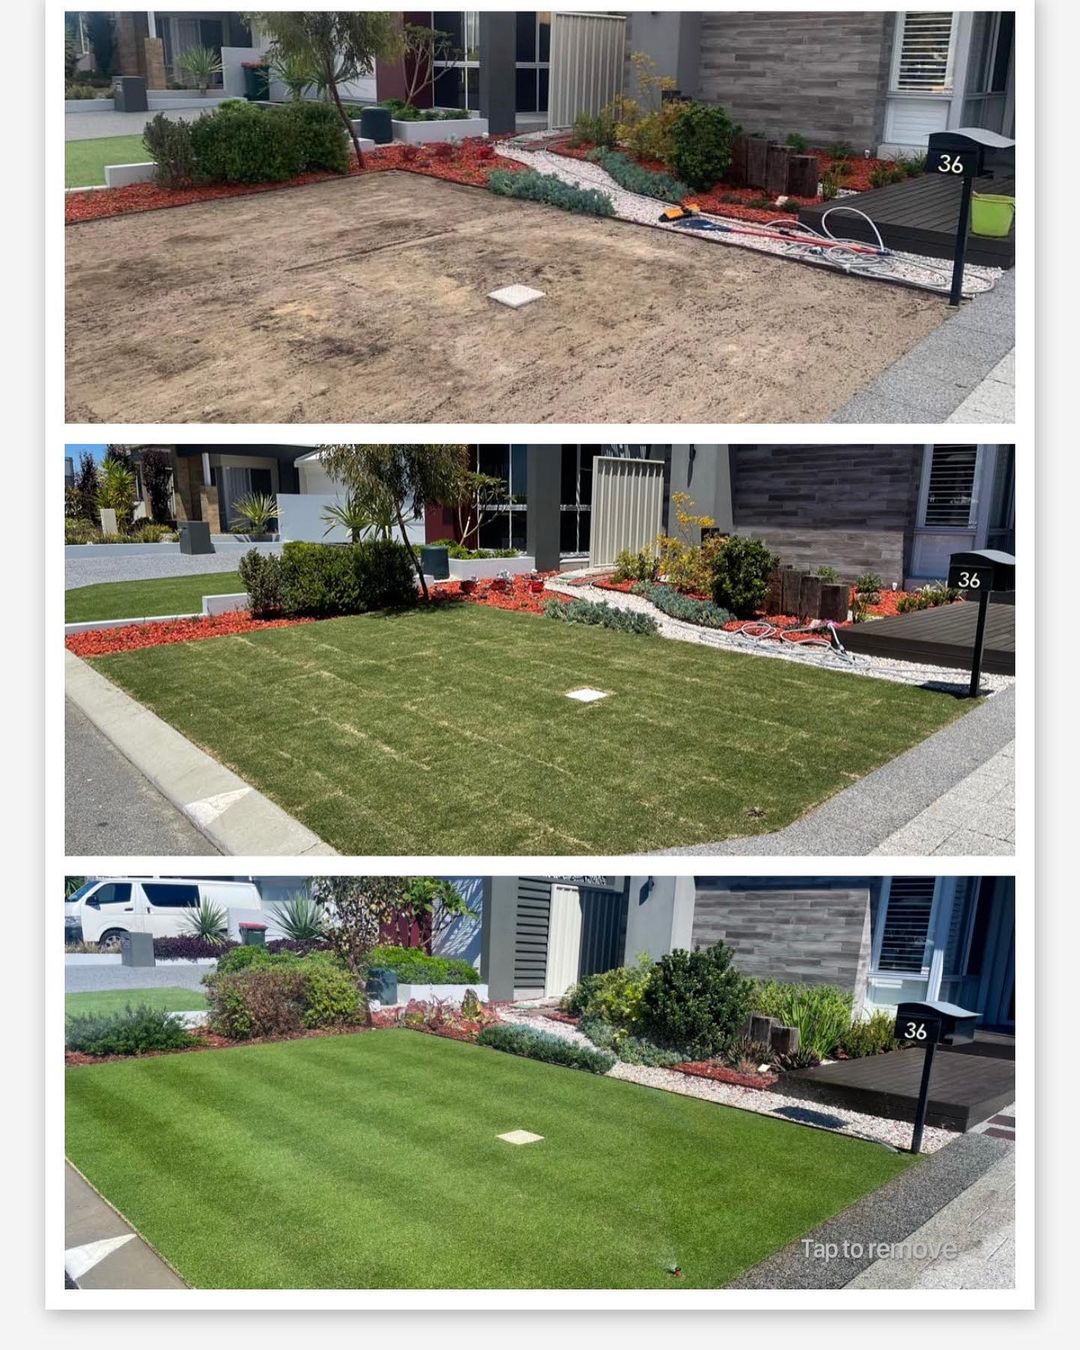 Awesome lawn journey 